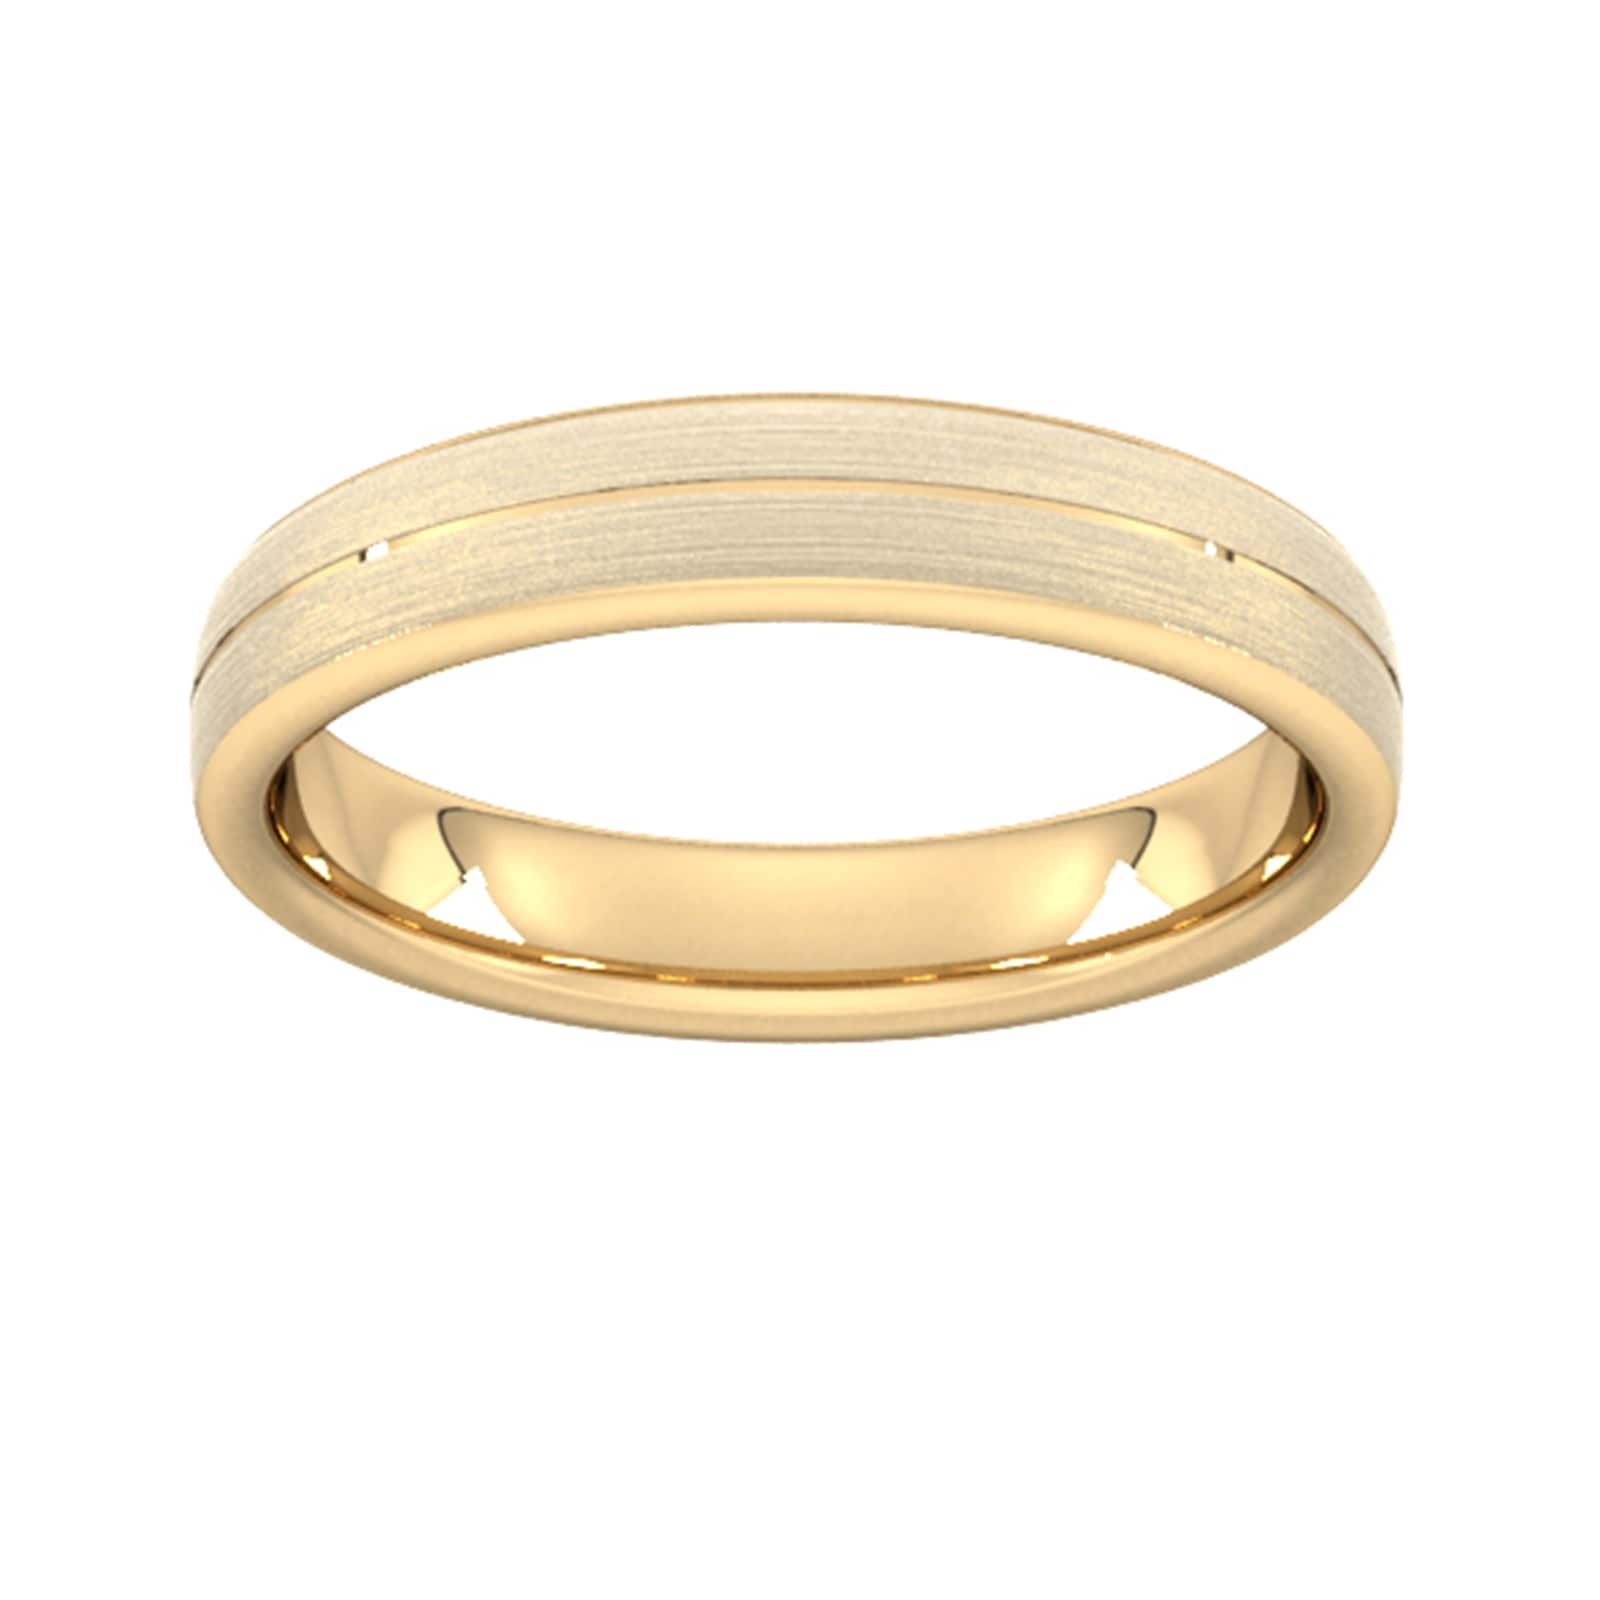 4mm Slight Court Heavy Centre Groove With Chamfered Edge Wedding Ring In 18 Carat Yellow Gold - Ring Size U